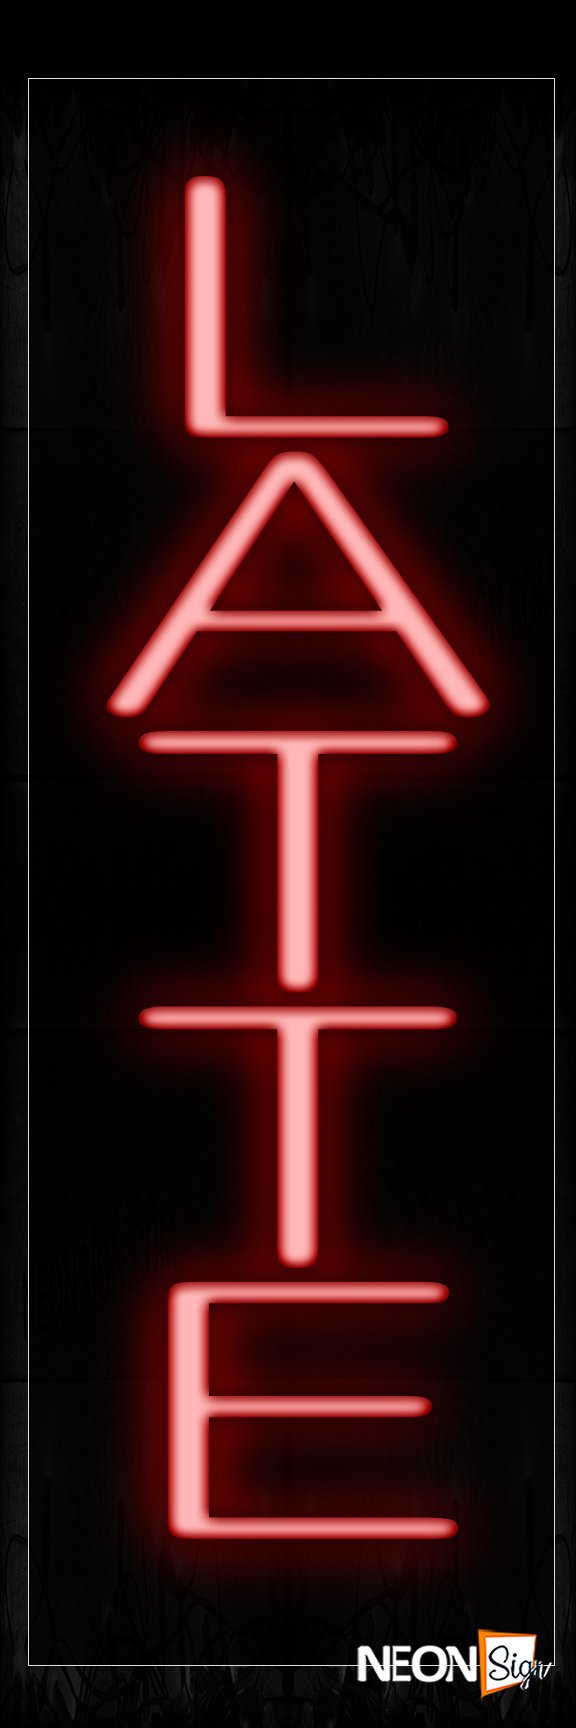 Image of 12348 Latte In Red (Vertical) Neon Signs_8x24 Black Backing